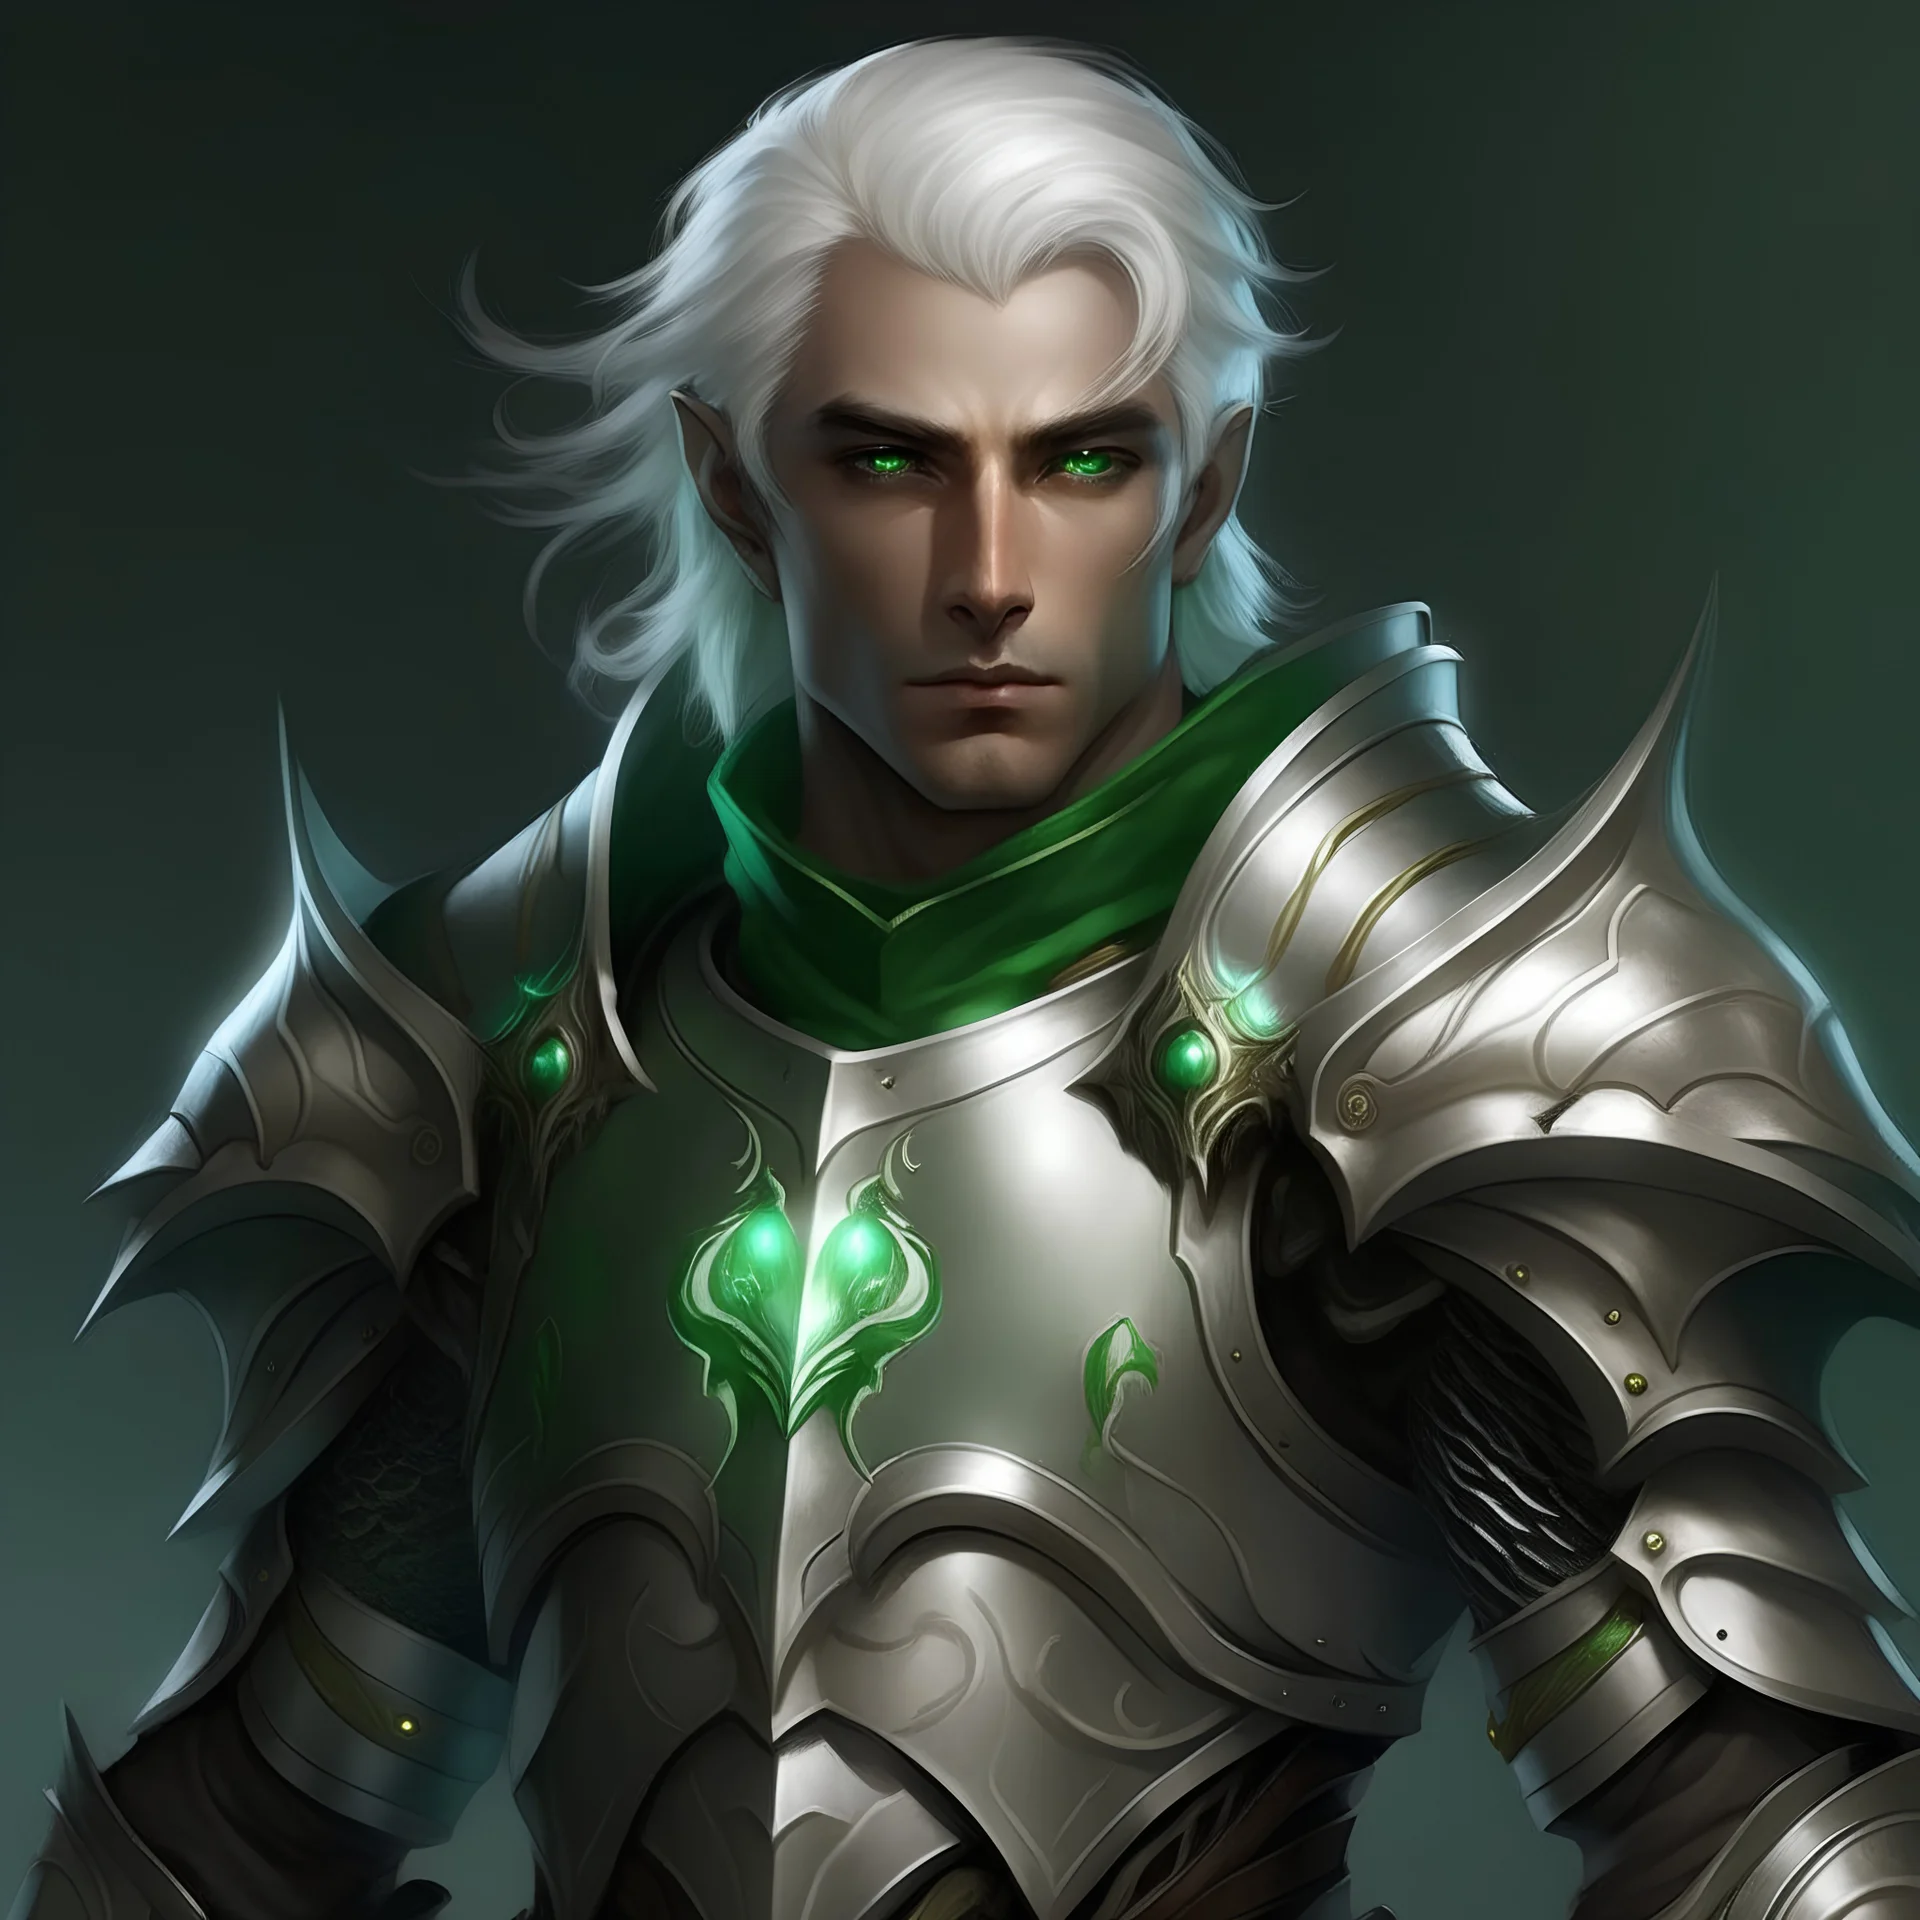 Please create an image for a young elven male with light brown skin, silver hair, and green eyes. He is wearing leather armor and is accompanied by a metallic robot